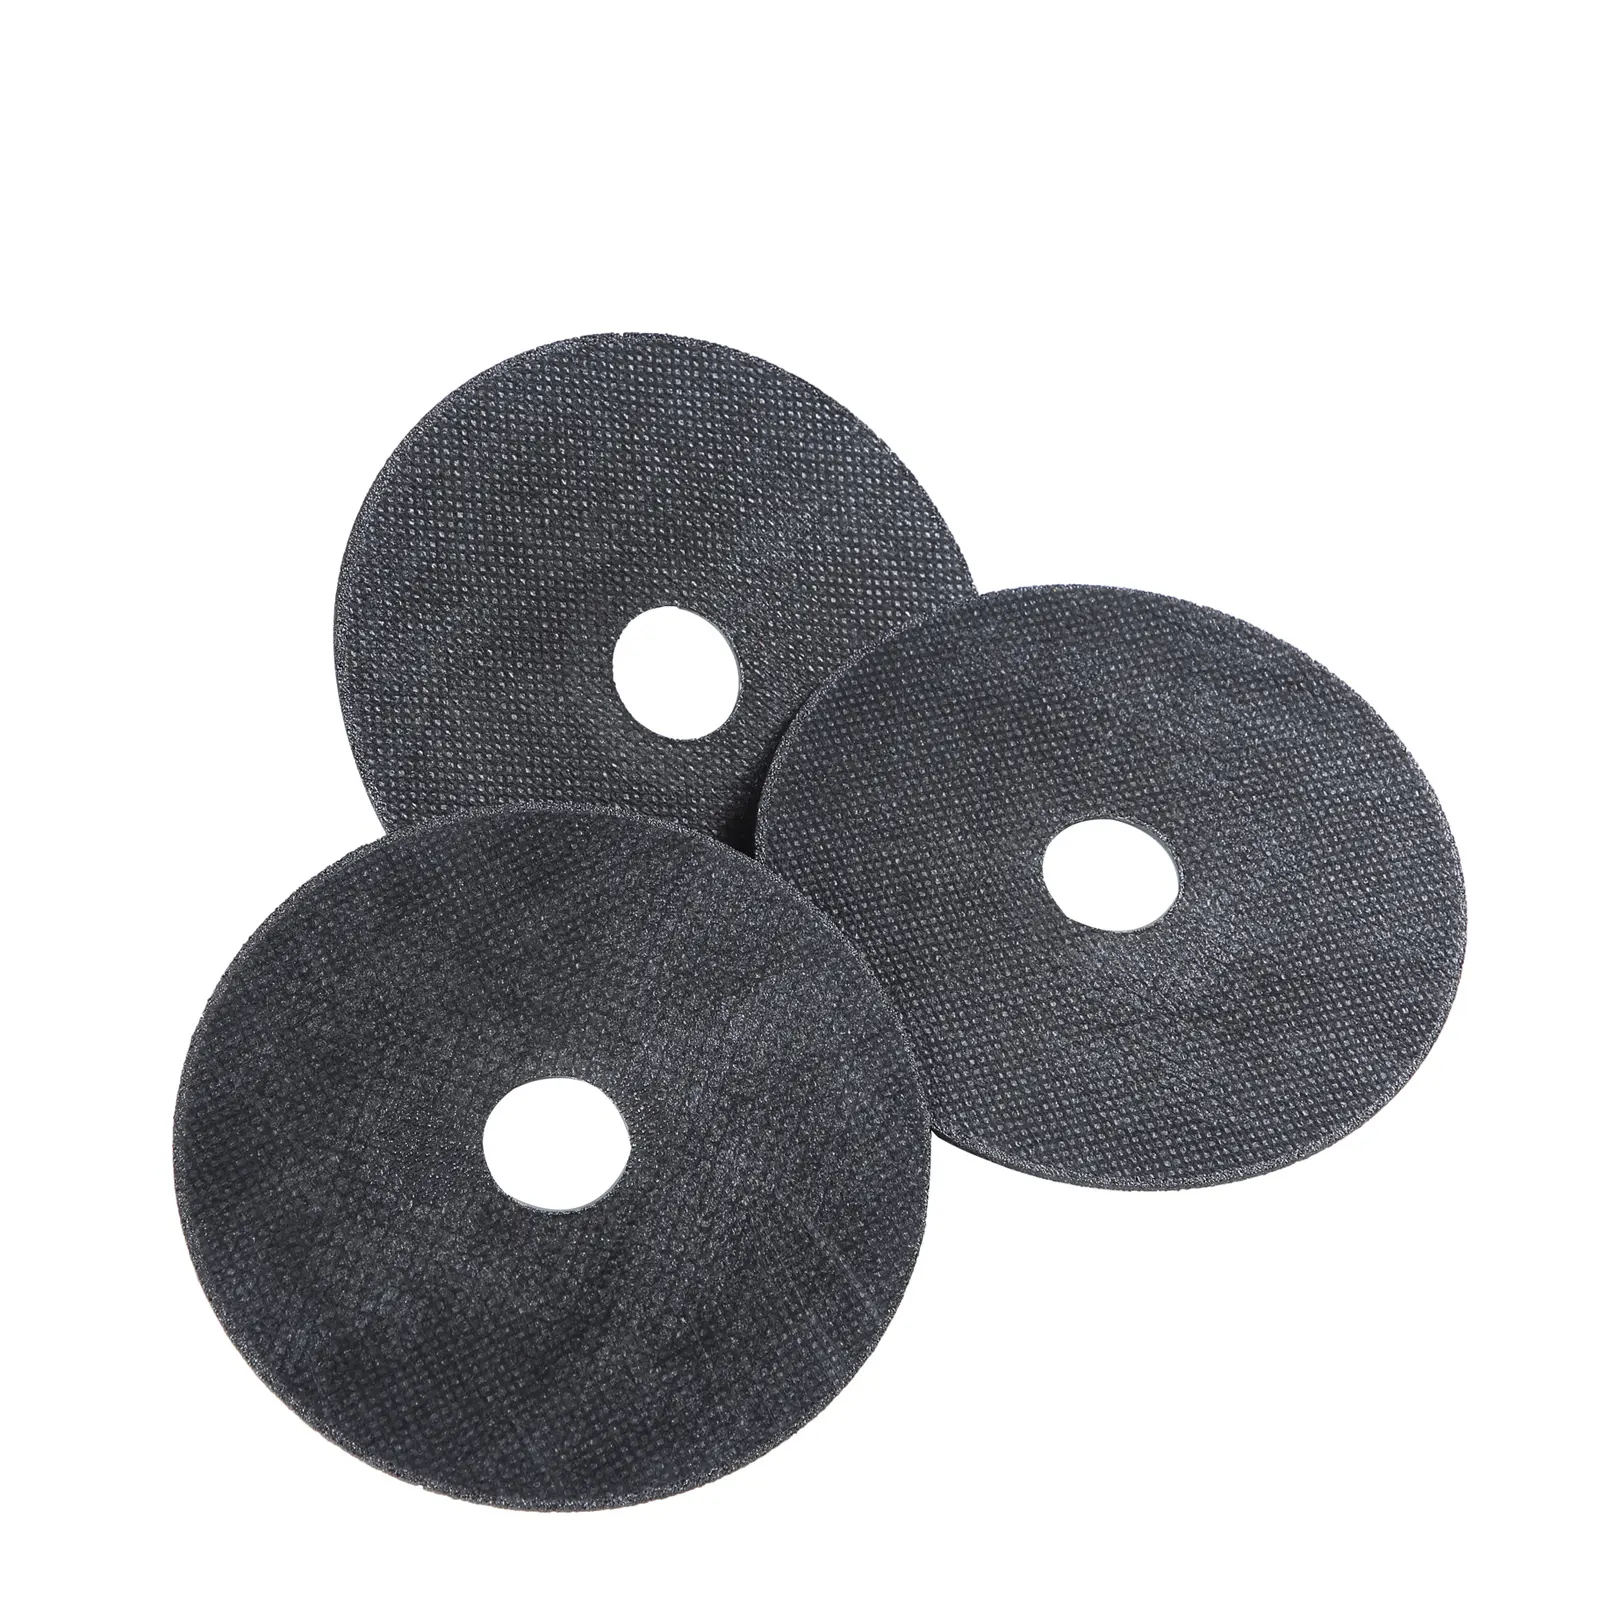 109*1.2*16mm Cutting Discs Abrasive Tools for Metal Cutting and Grinder Use